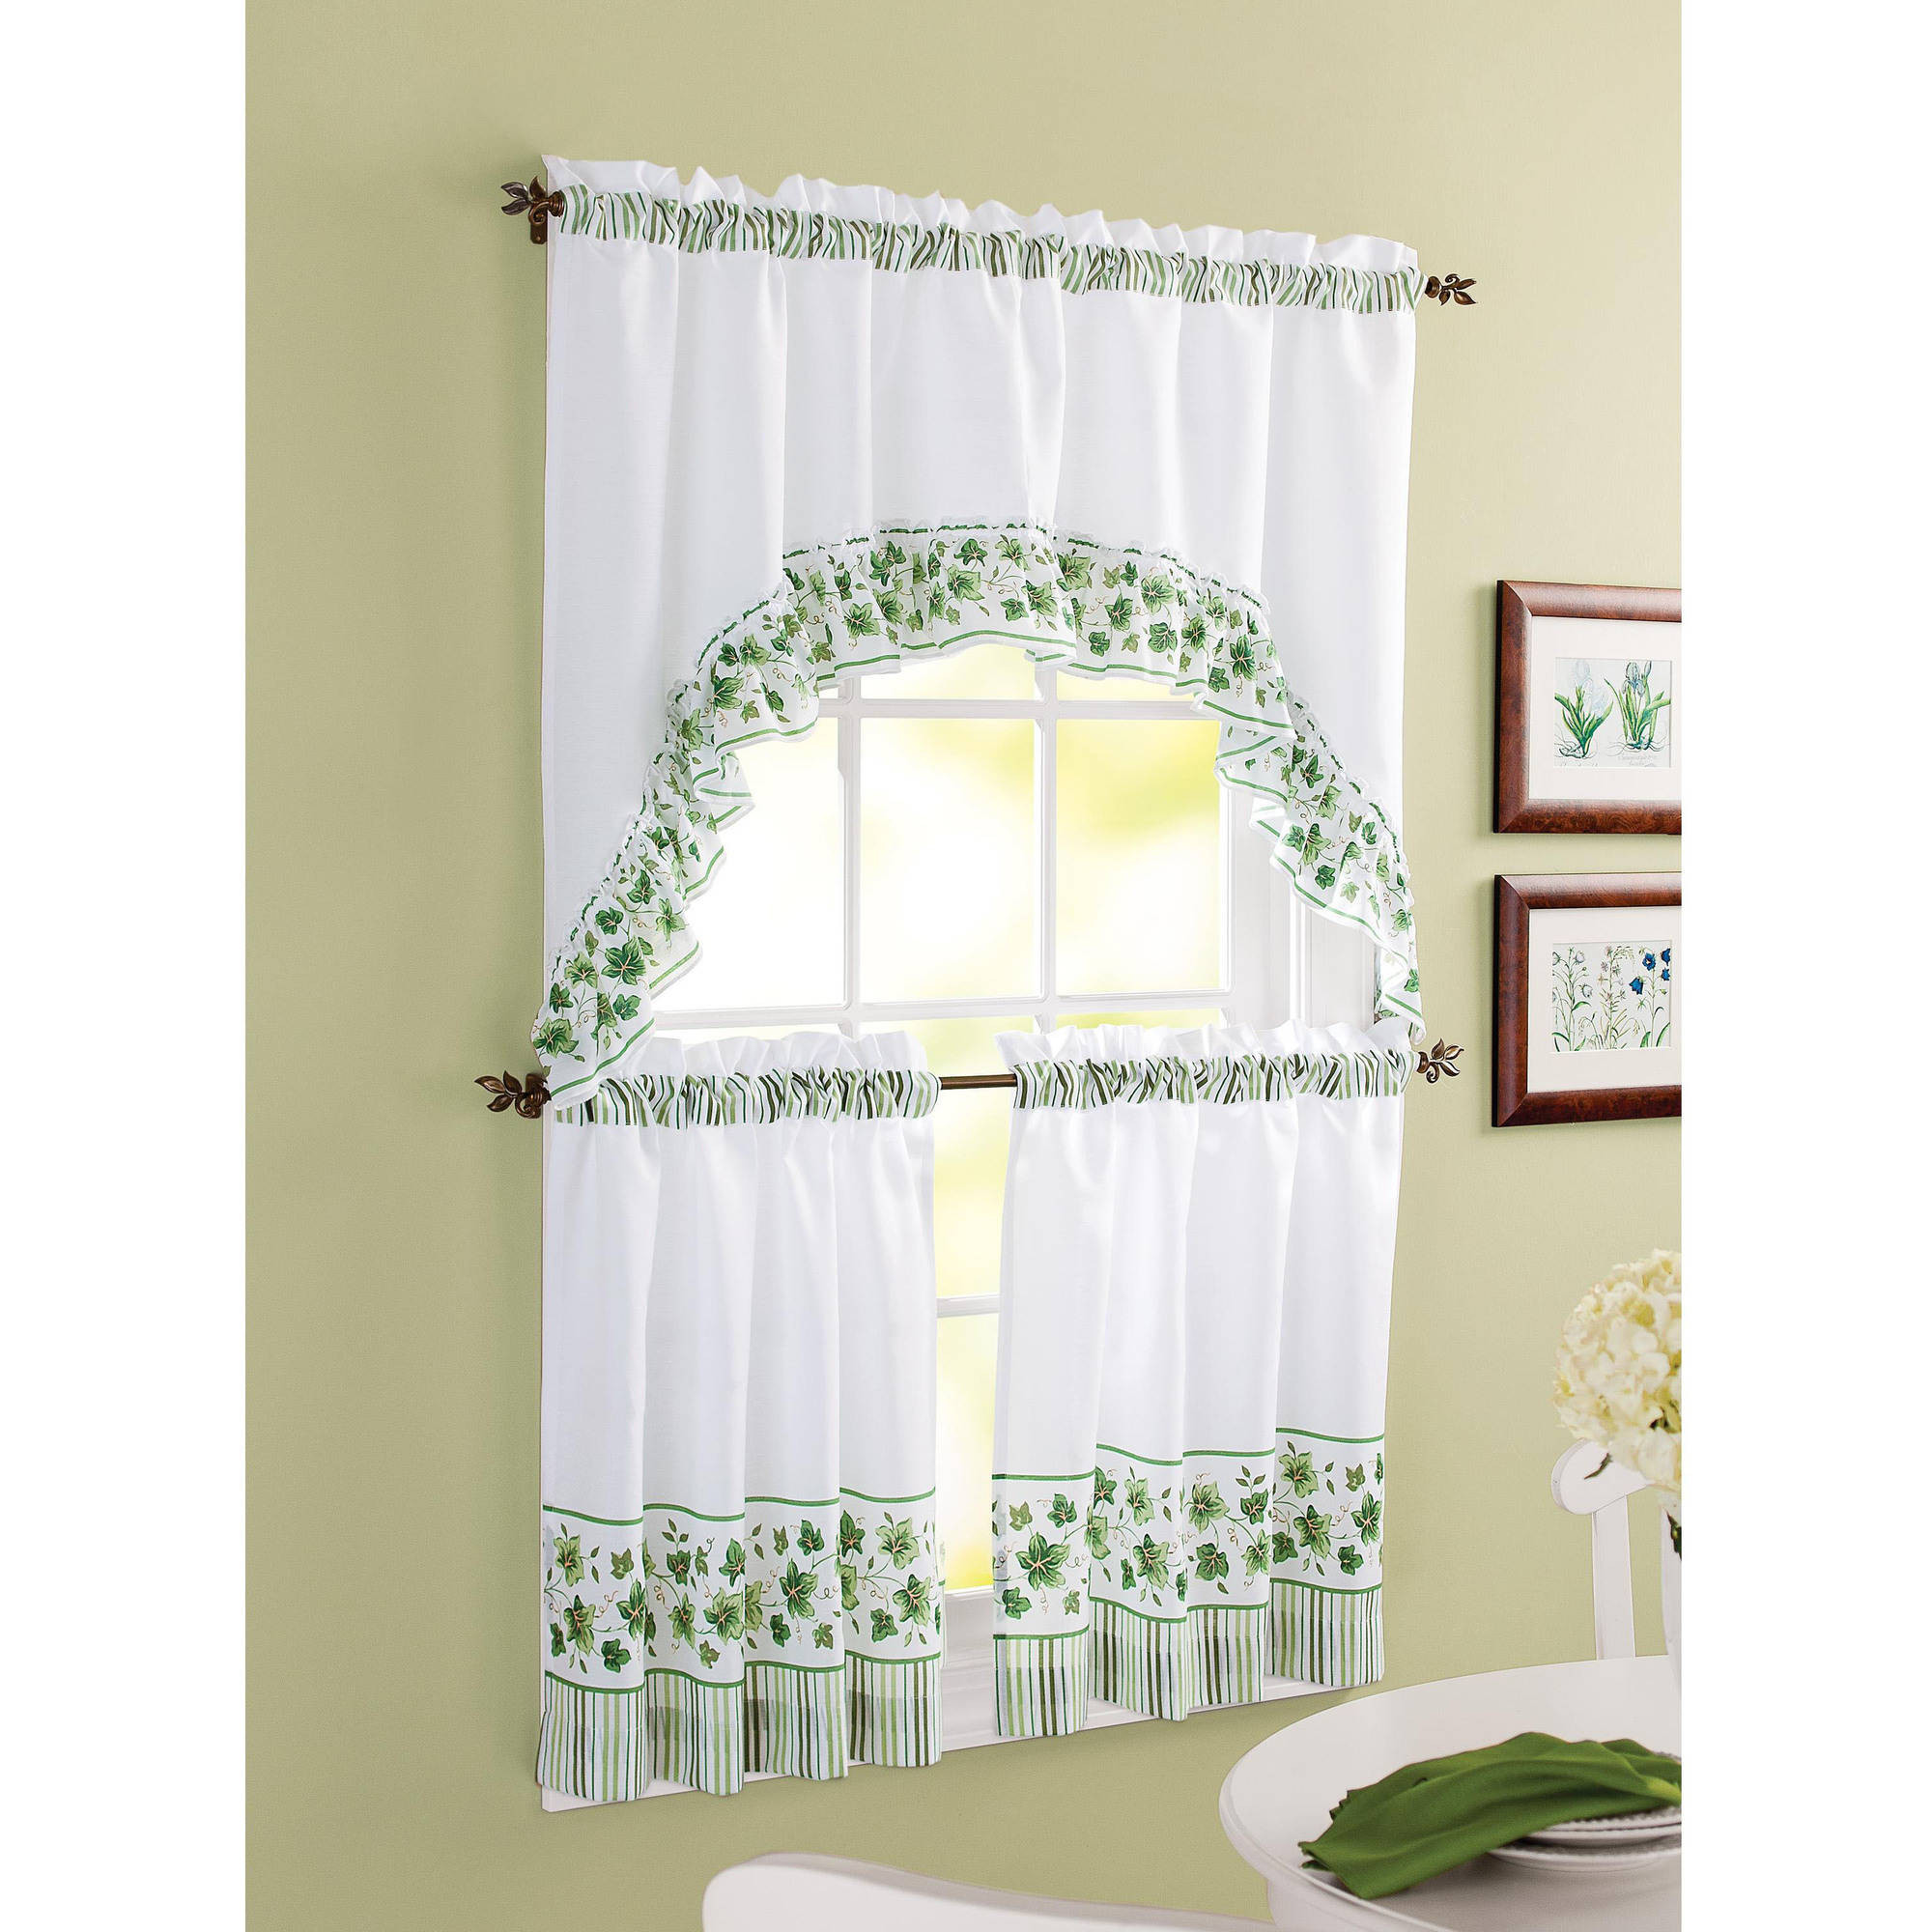 Walmart Kitchen Curtains Valances Lovely Curtain Charming Home Interior Accessories Ideas With Of Walmart Kitchen Curtains Valances 